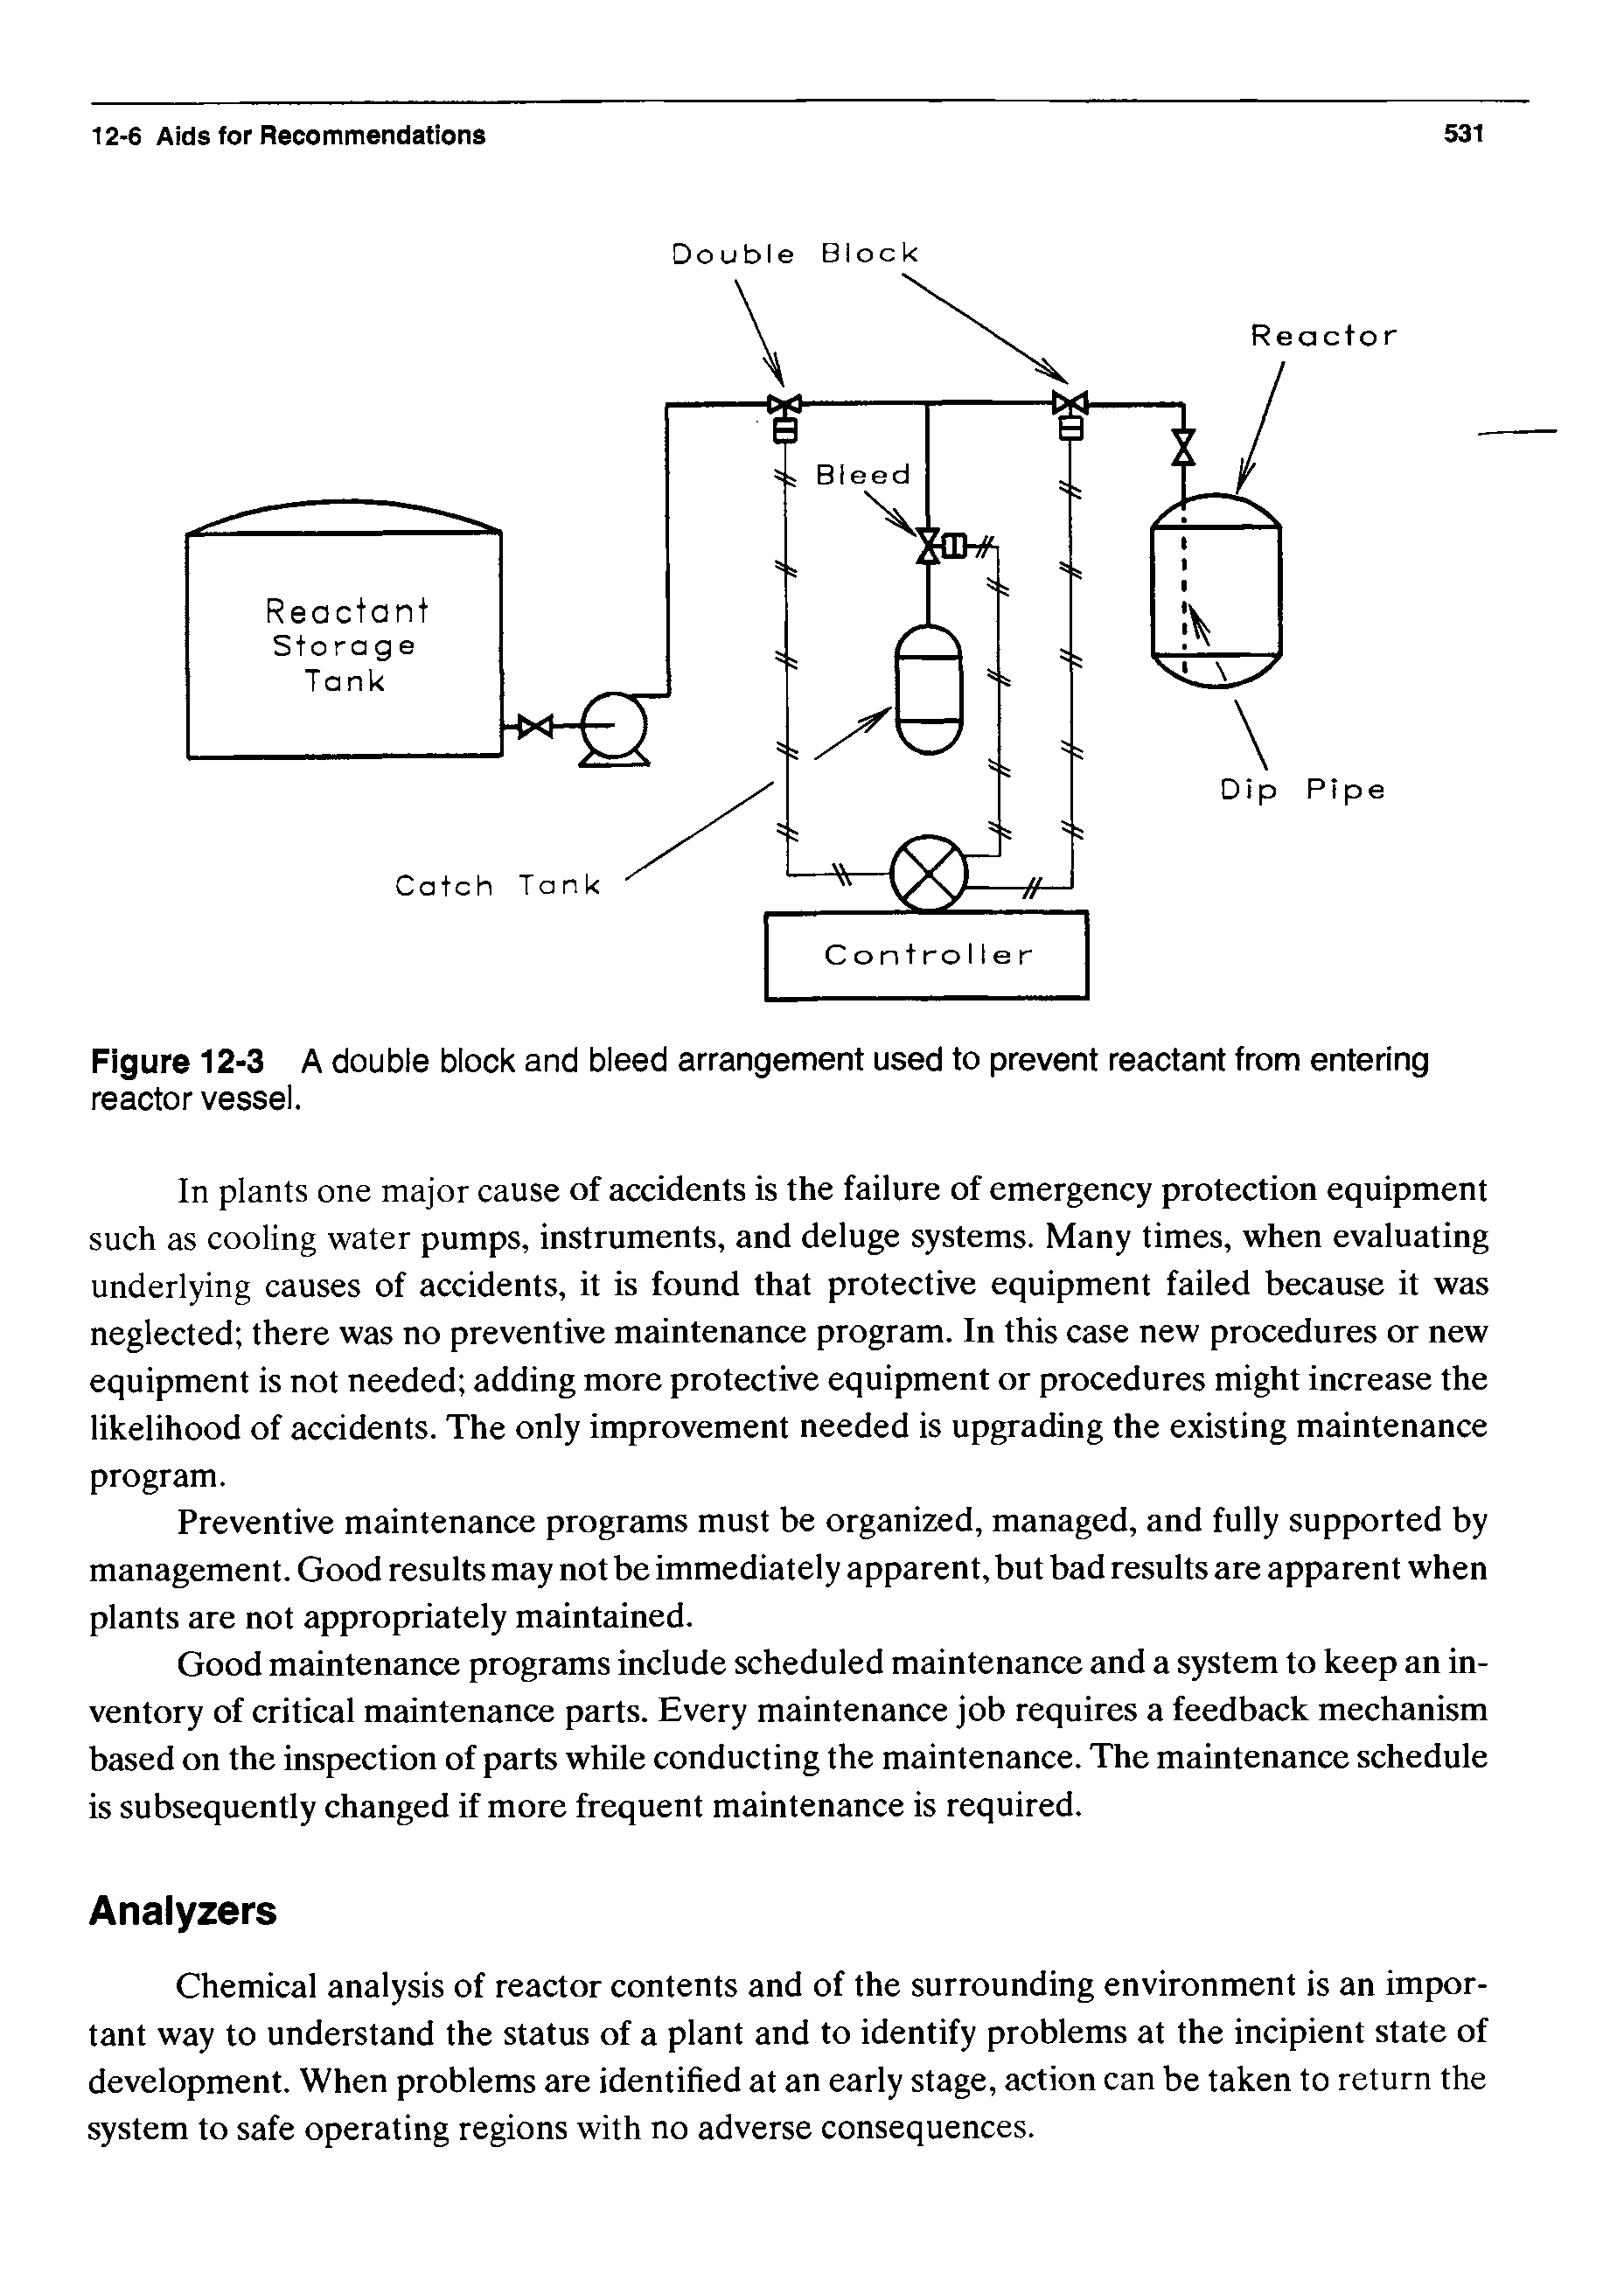 Figure 12-3 A double block and bleed arrangement used to prevent reactant from entering reactor vessel.